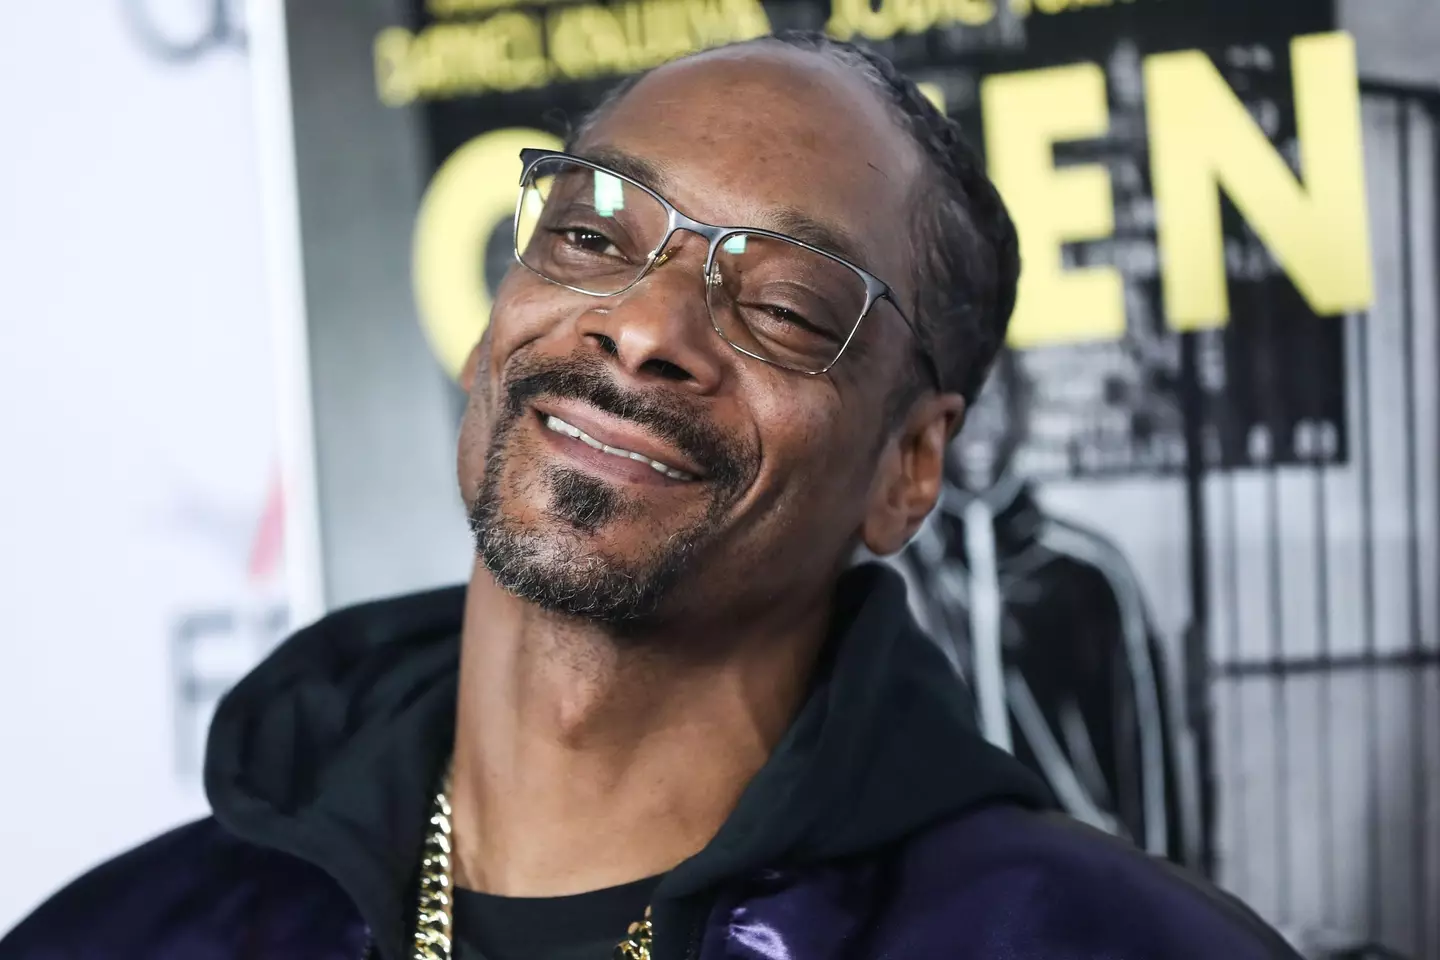 Snoop Dogg's reaction to the proposal has gone viral.